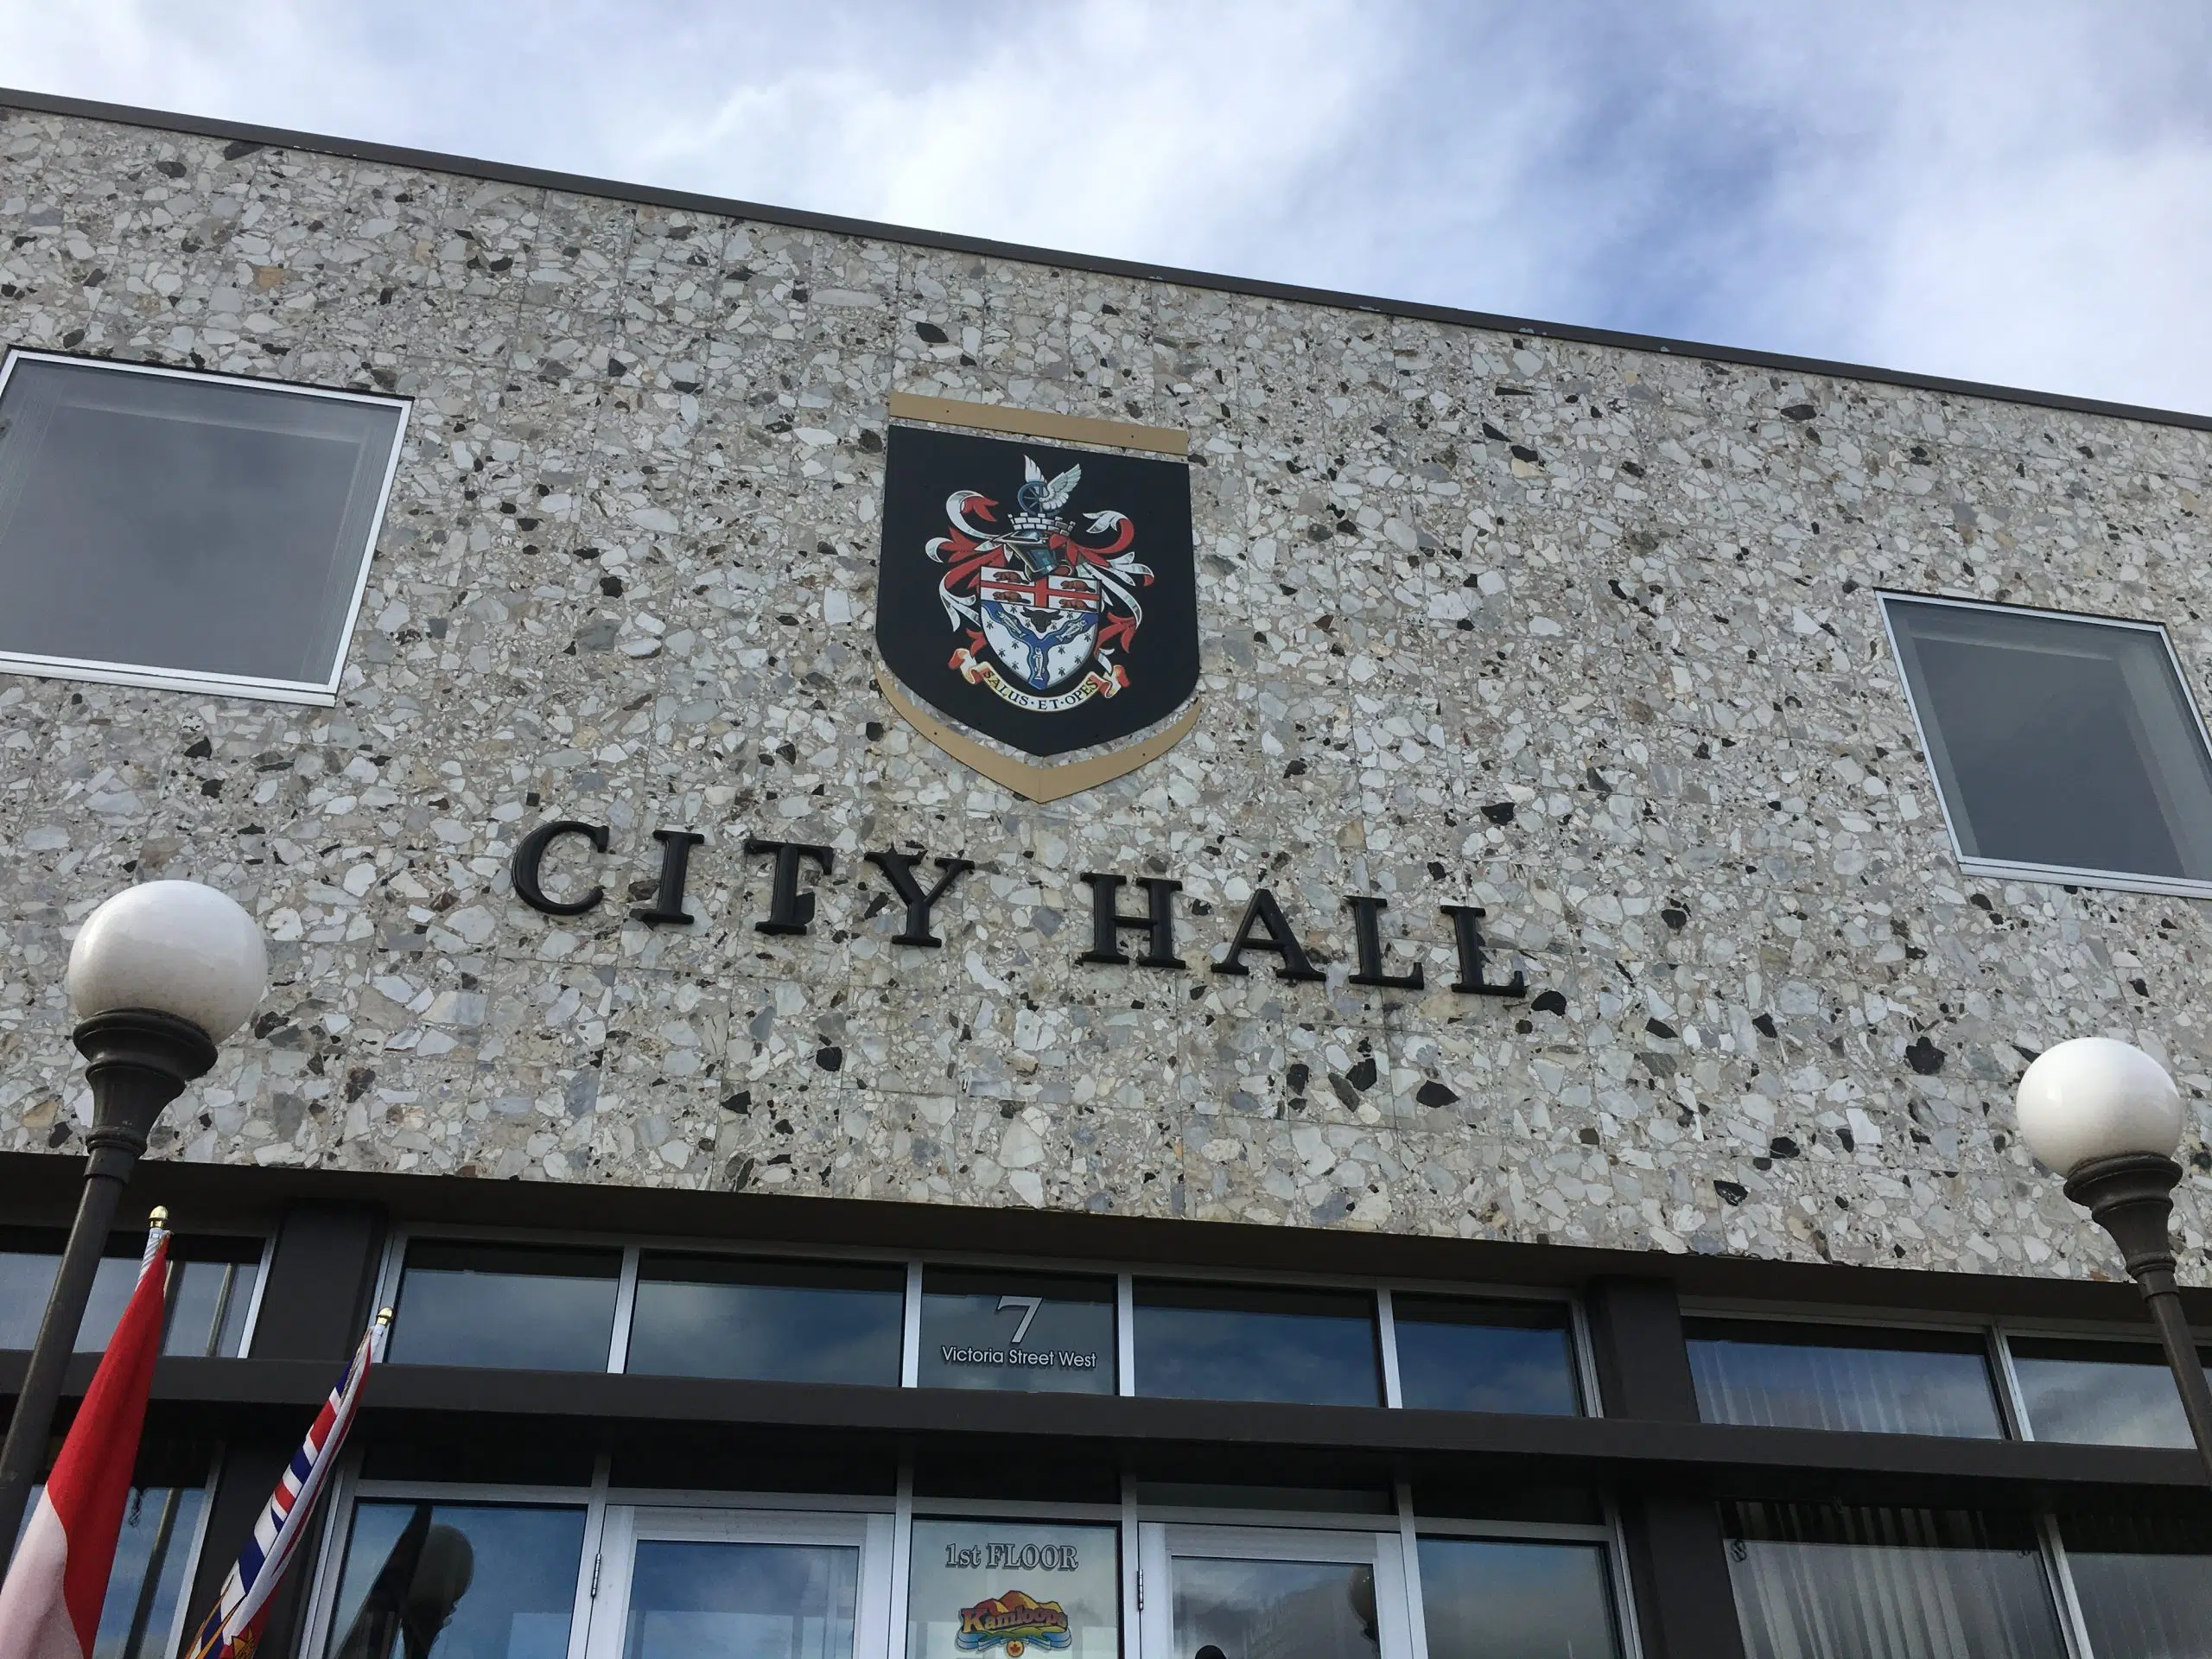 Candidate list for Kamloops 2018 municipal election